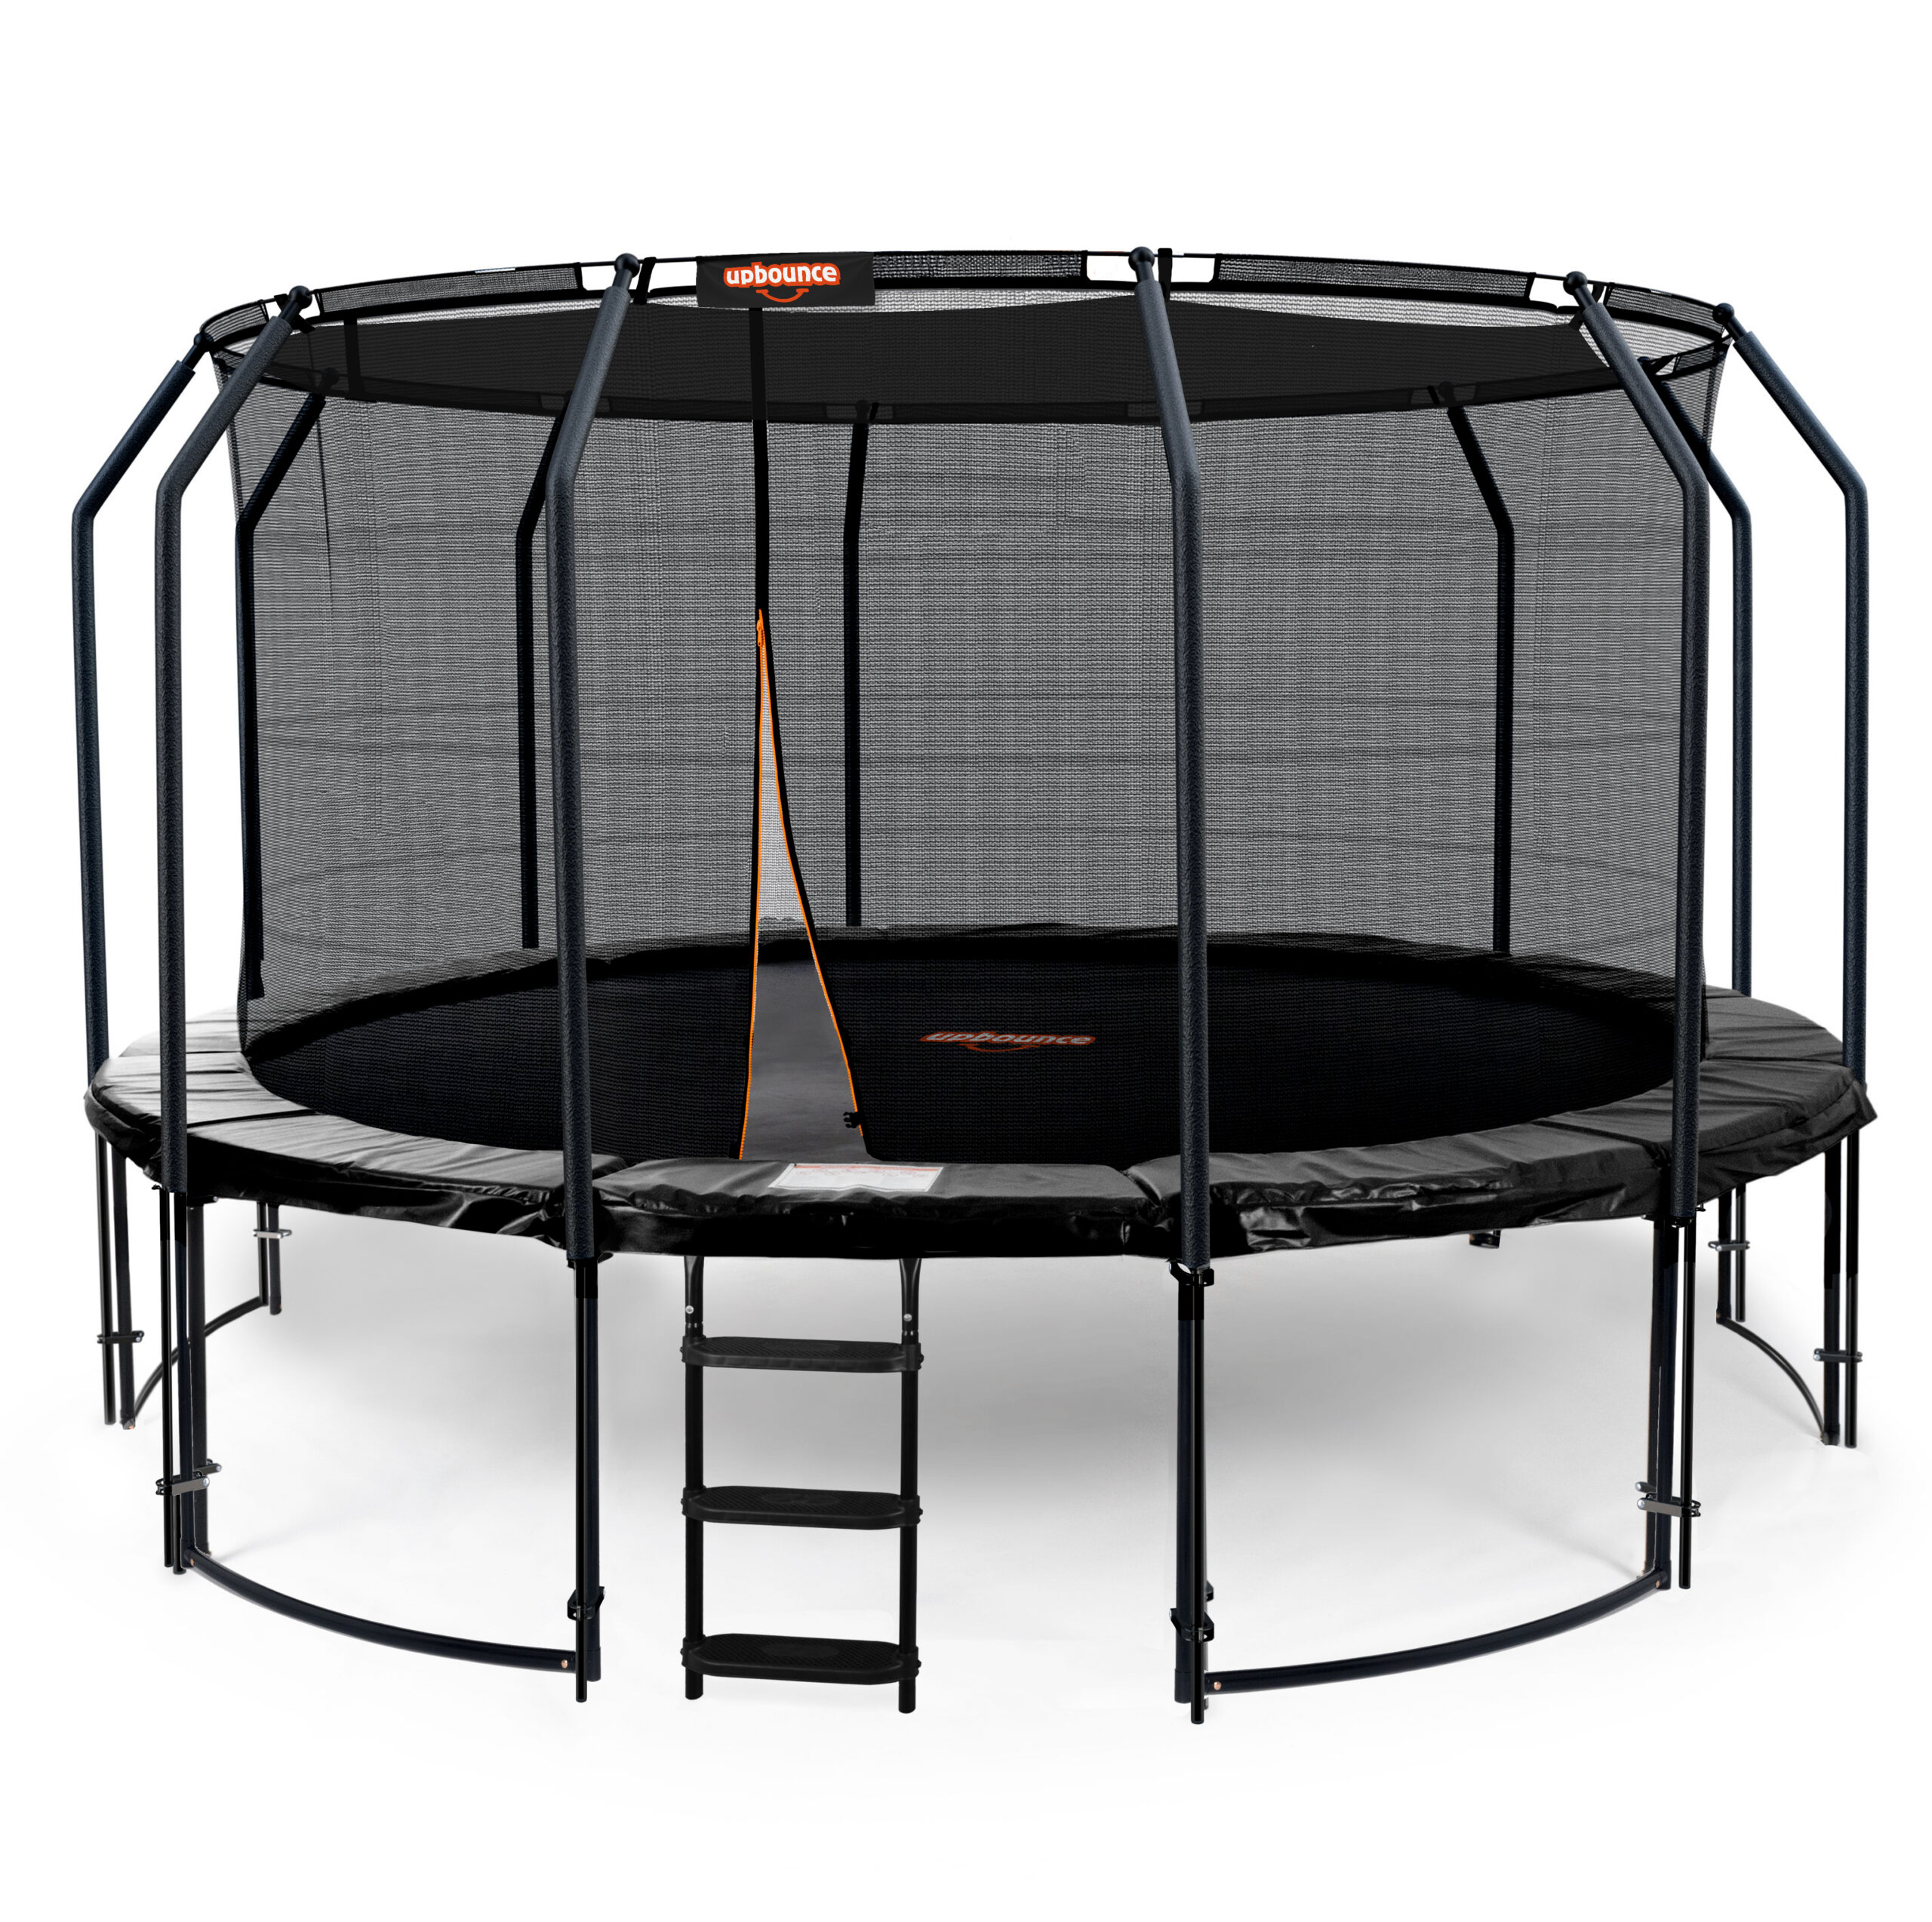 14ft Trampoline with Ladder Shade scaled